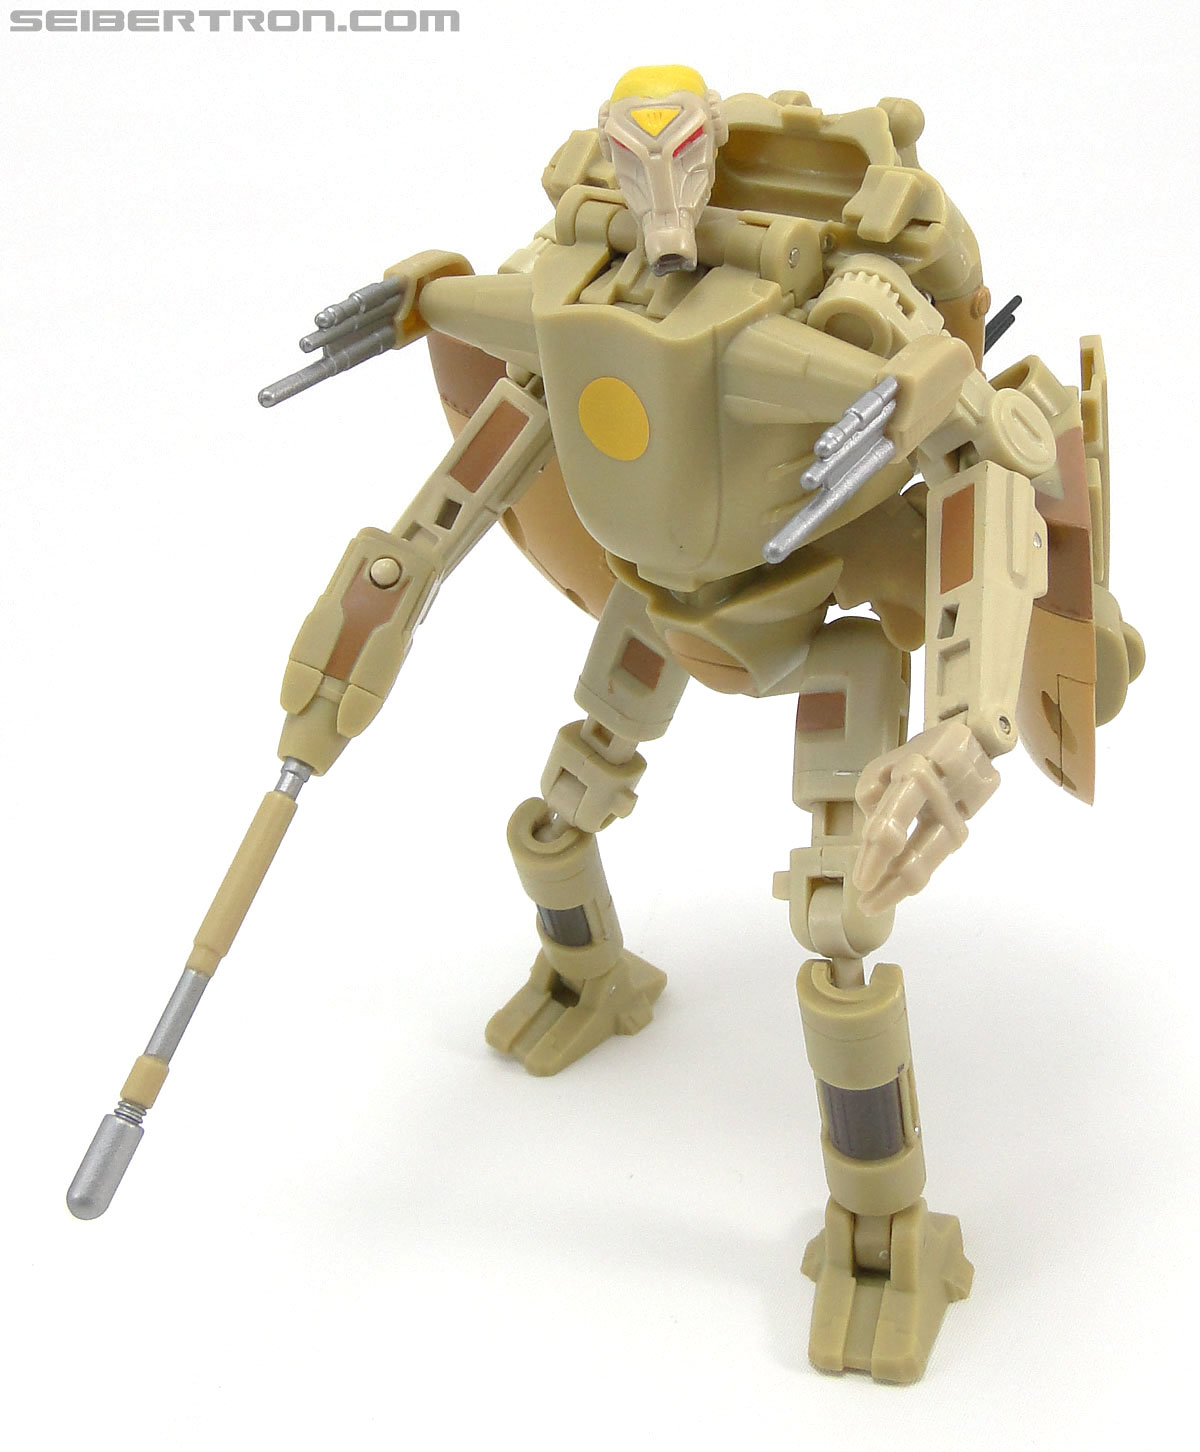 Star Wars Transformers Battle Droid Commader (Armored Assault Tank) (Battle Droid Commader) (Image #62 of 85)